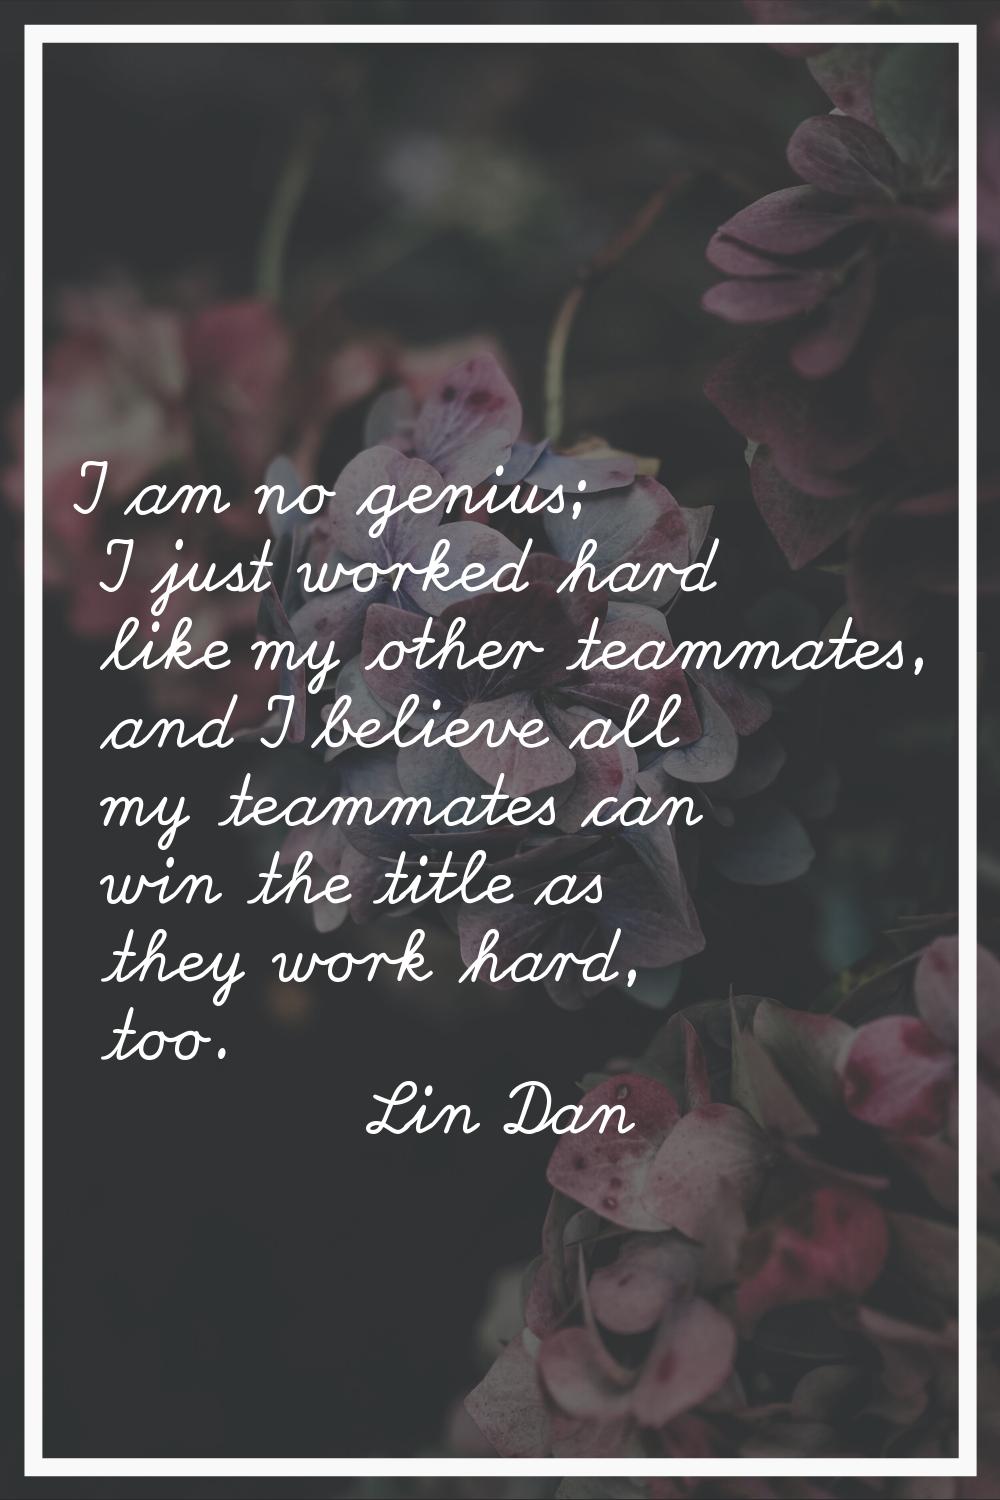 I am no genius; I just worked hard like my other teammates, and I believe all my teammates can win 